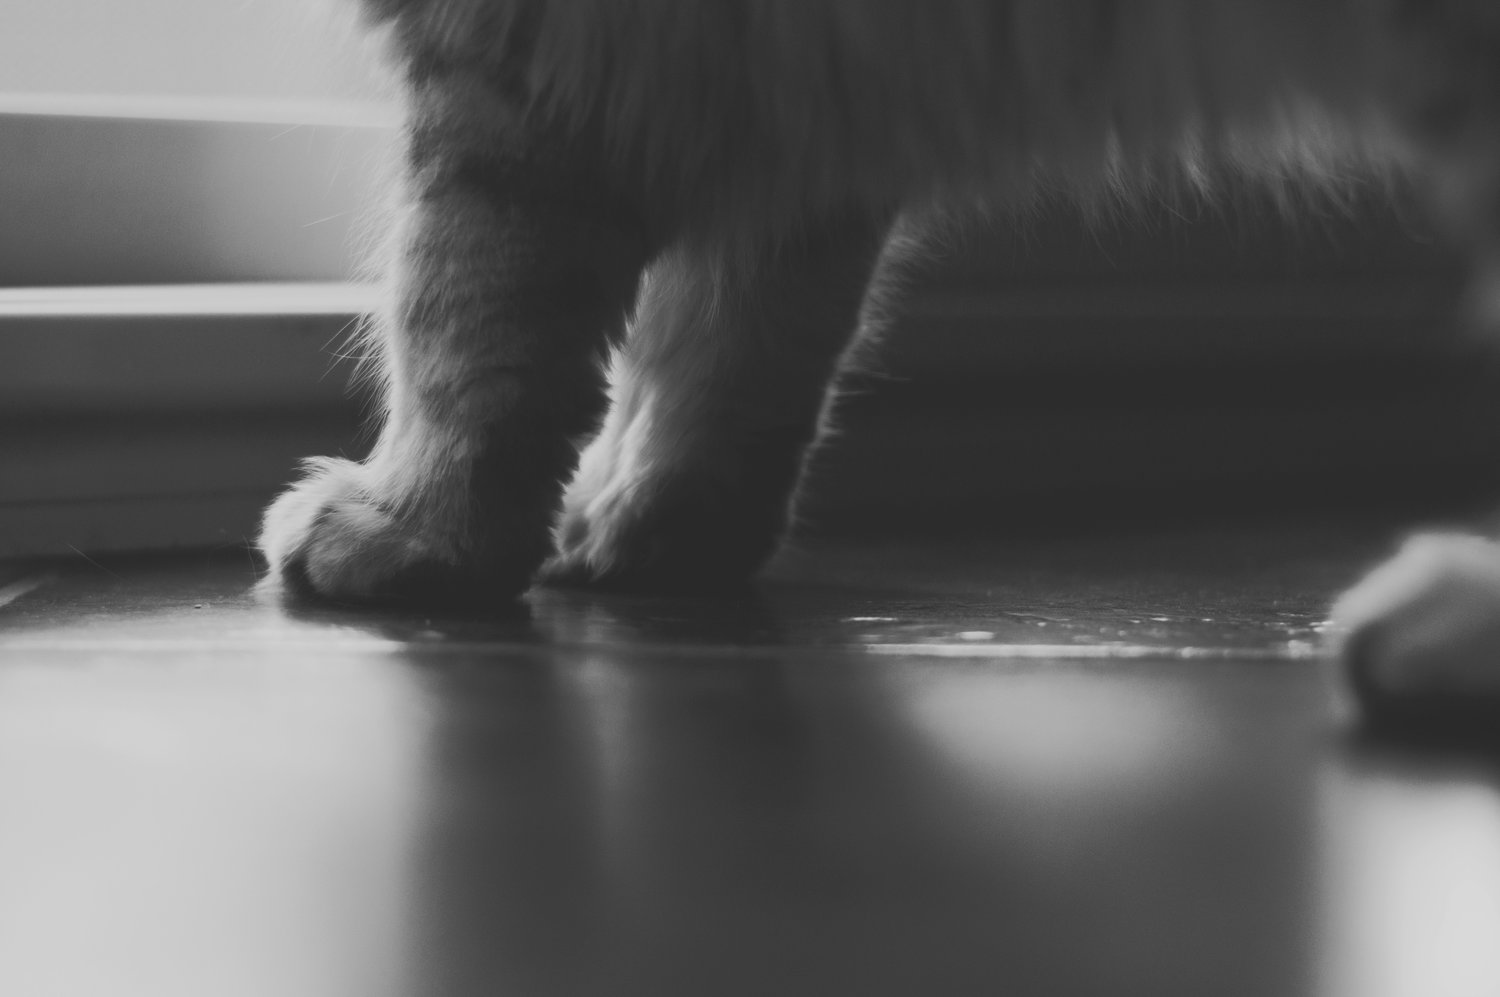 How To Prevent Cat Litter Tracking On Floors According To A Cat